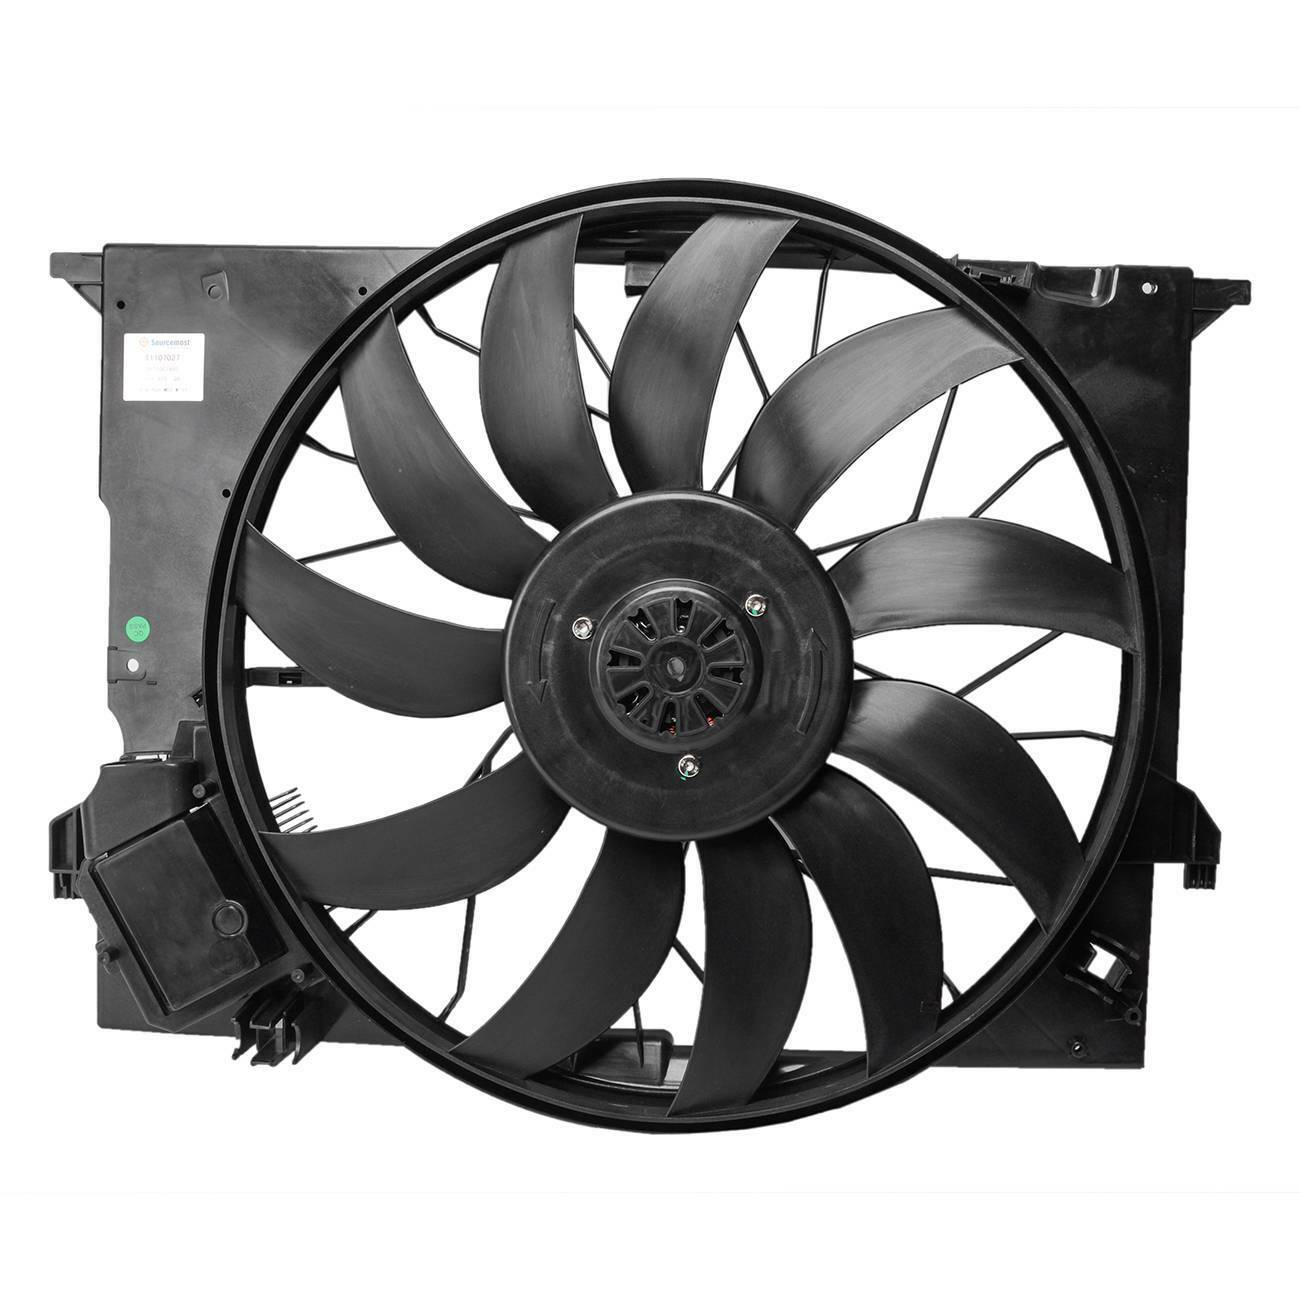 Radiator Cooling Fan for Mercedes W221 W211 C216 CL500 S500 CL63 AMG 04-13